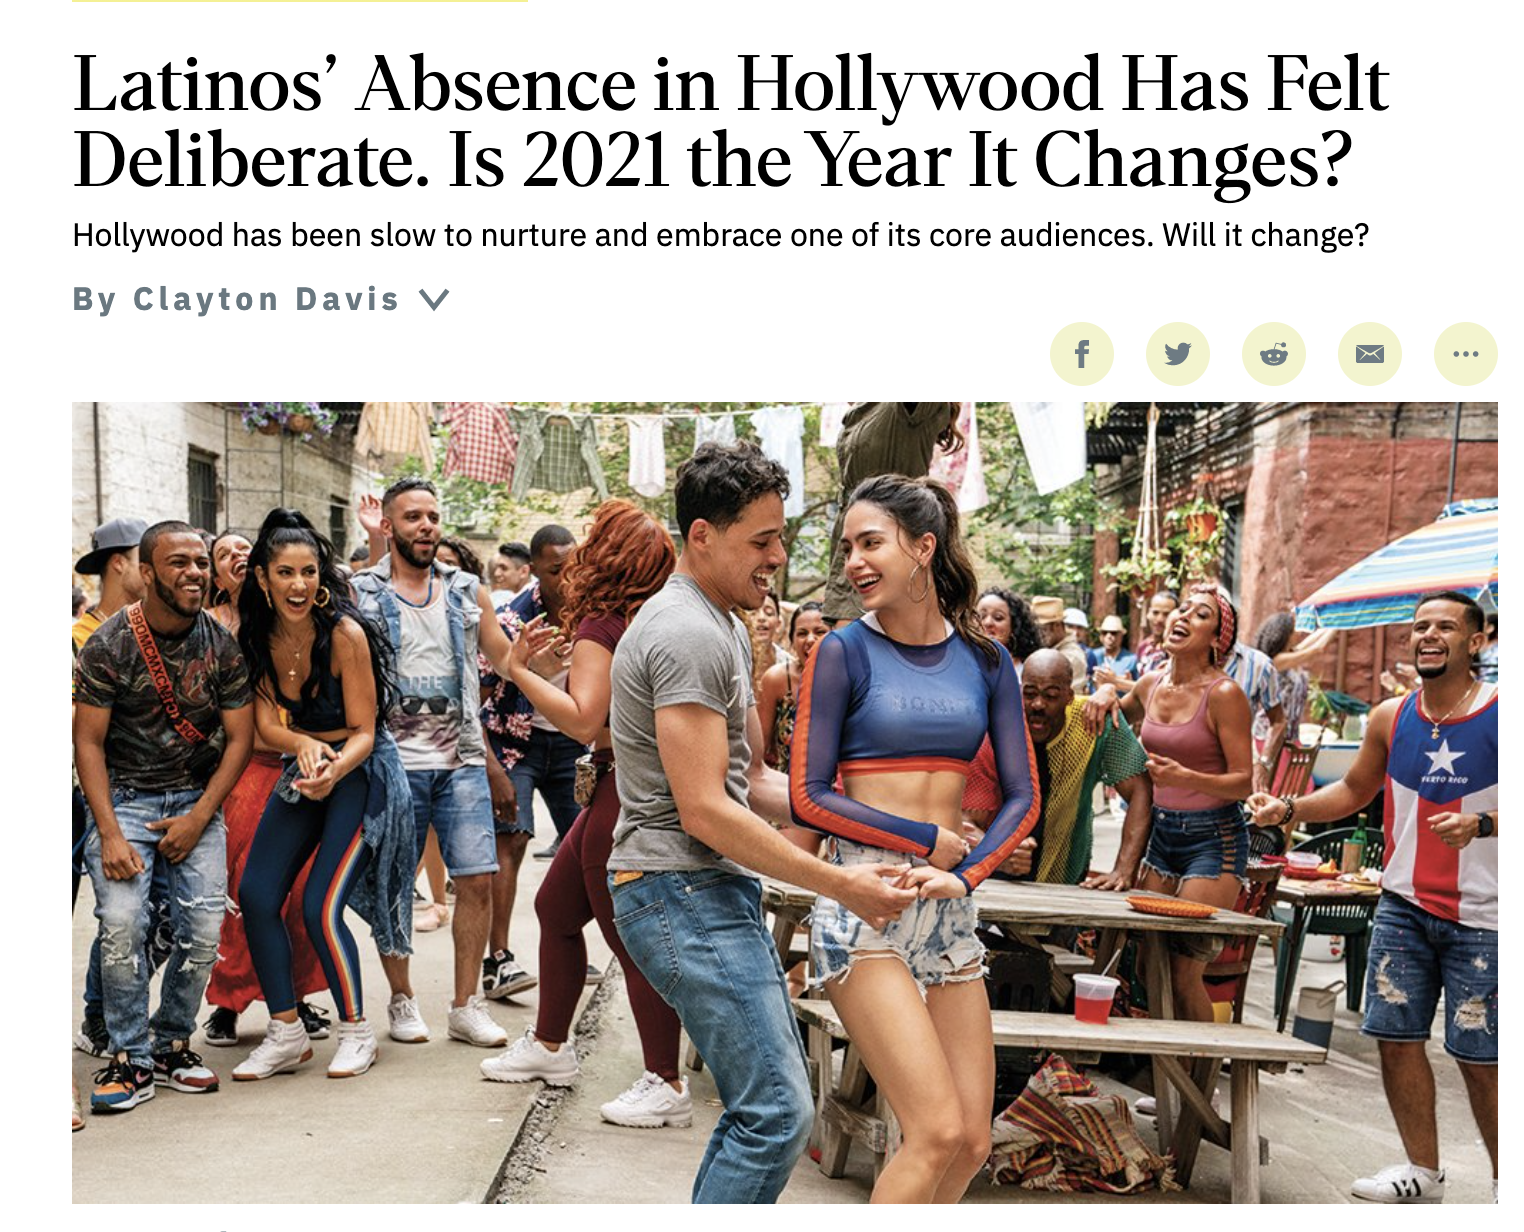 Hollywood seems to be making an effort.  - But how do we make sure this isn’t just a fluke?